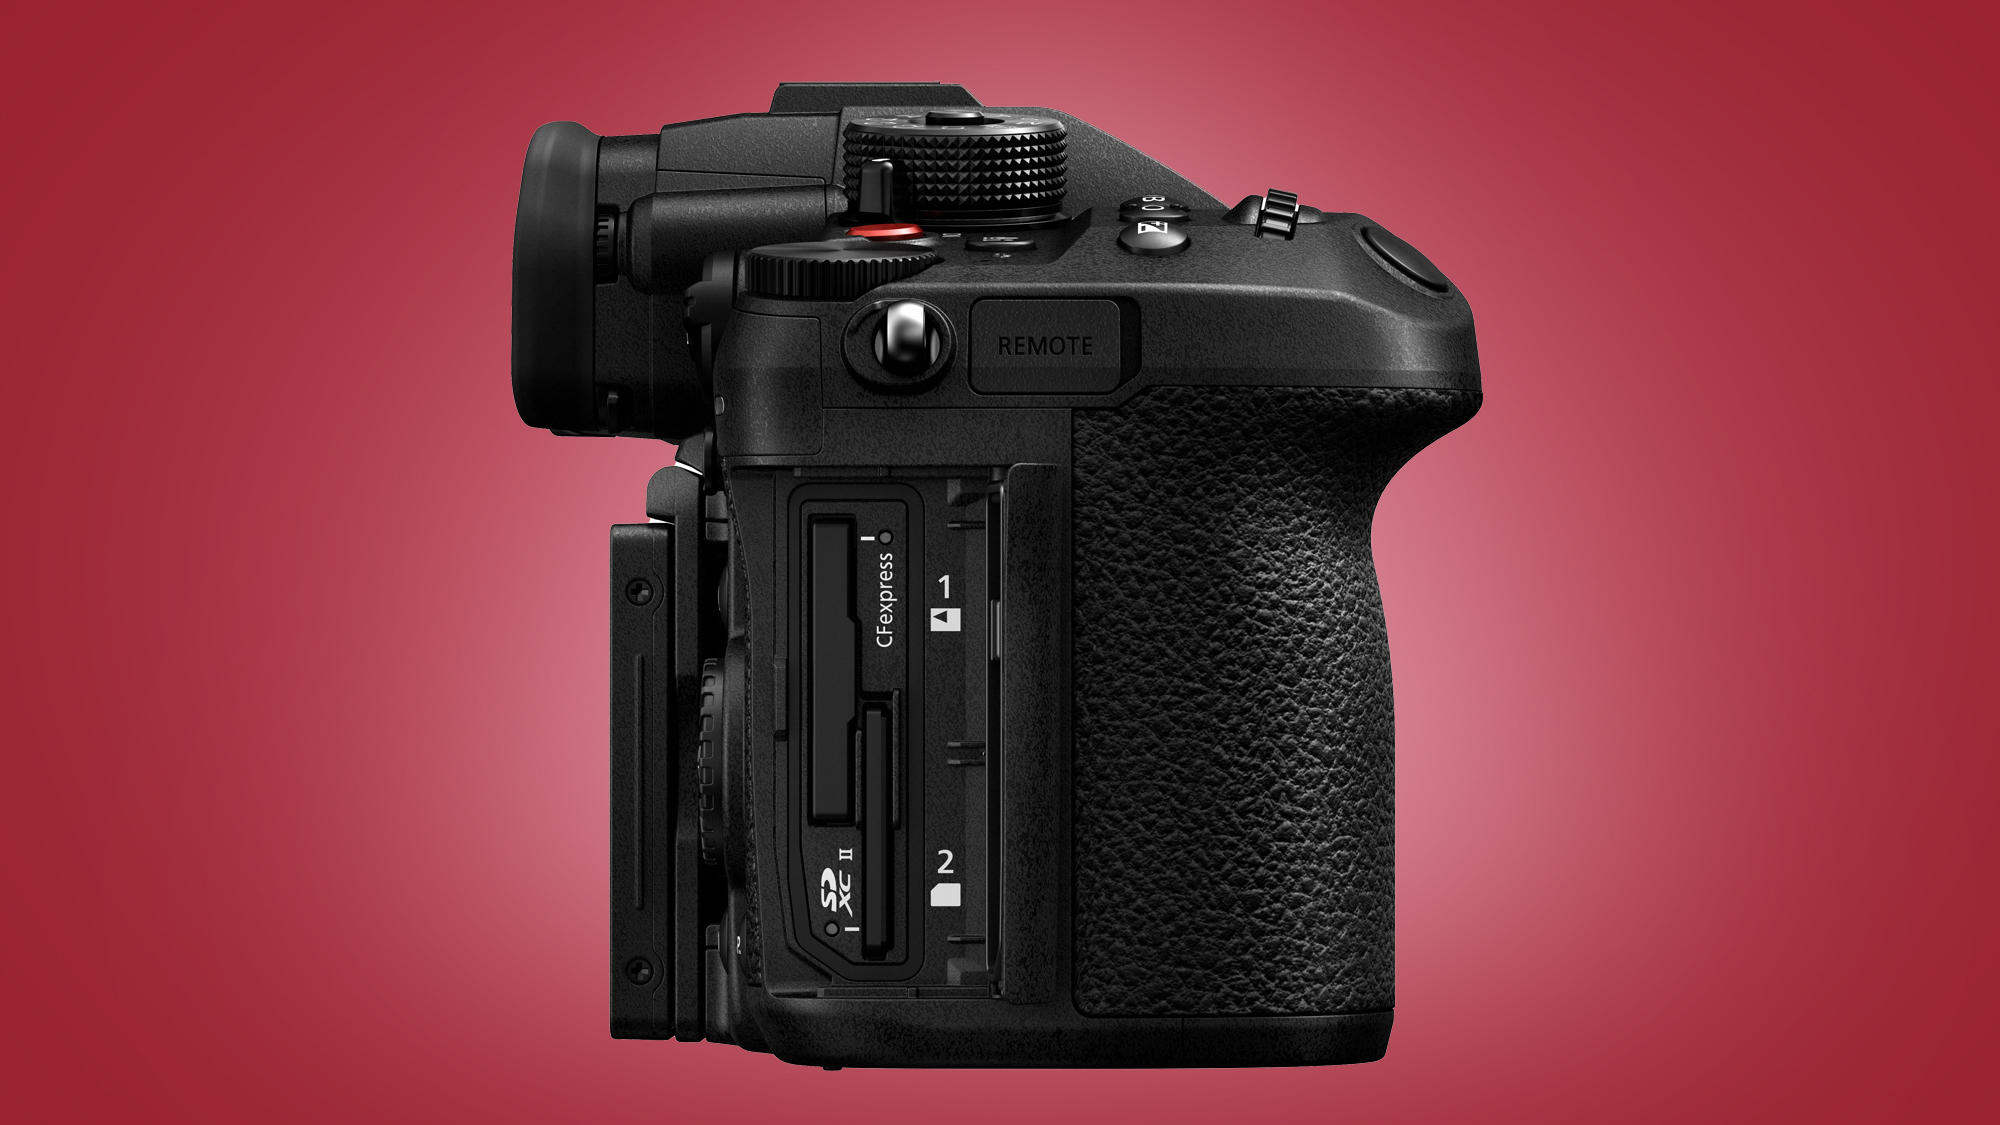 The Panasonic GH6 camera on a red background